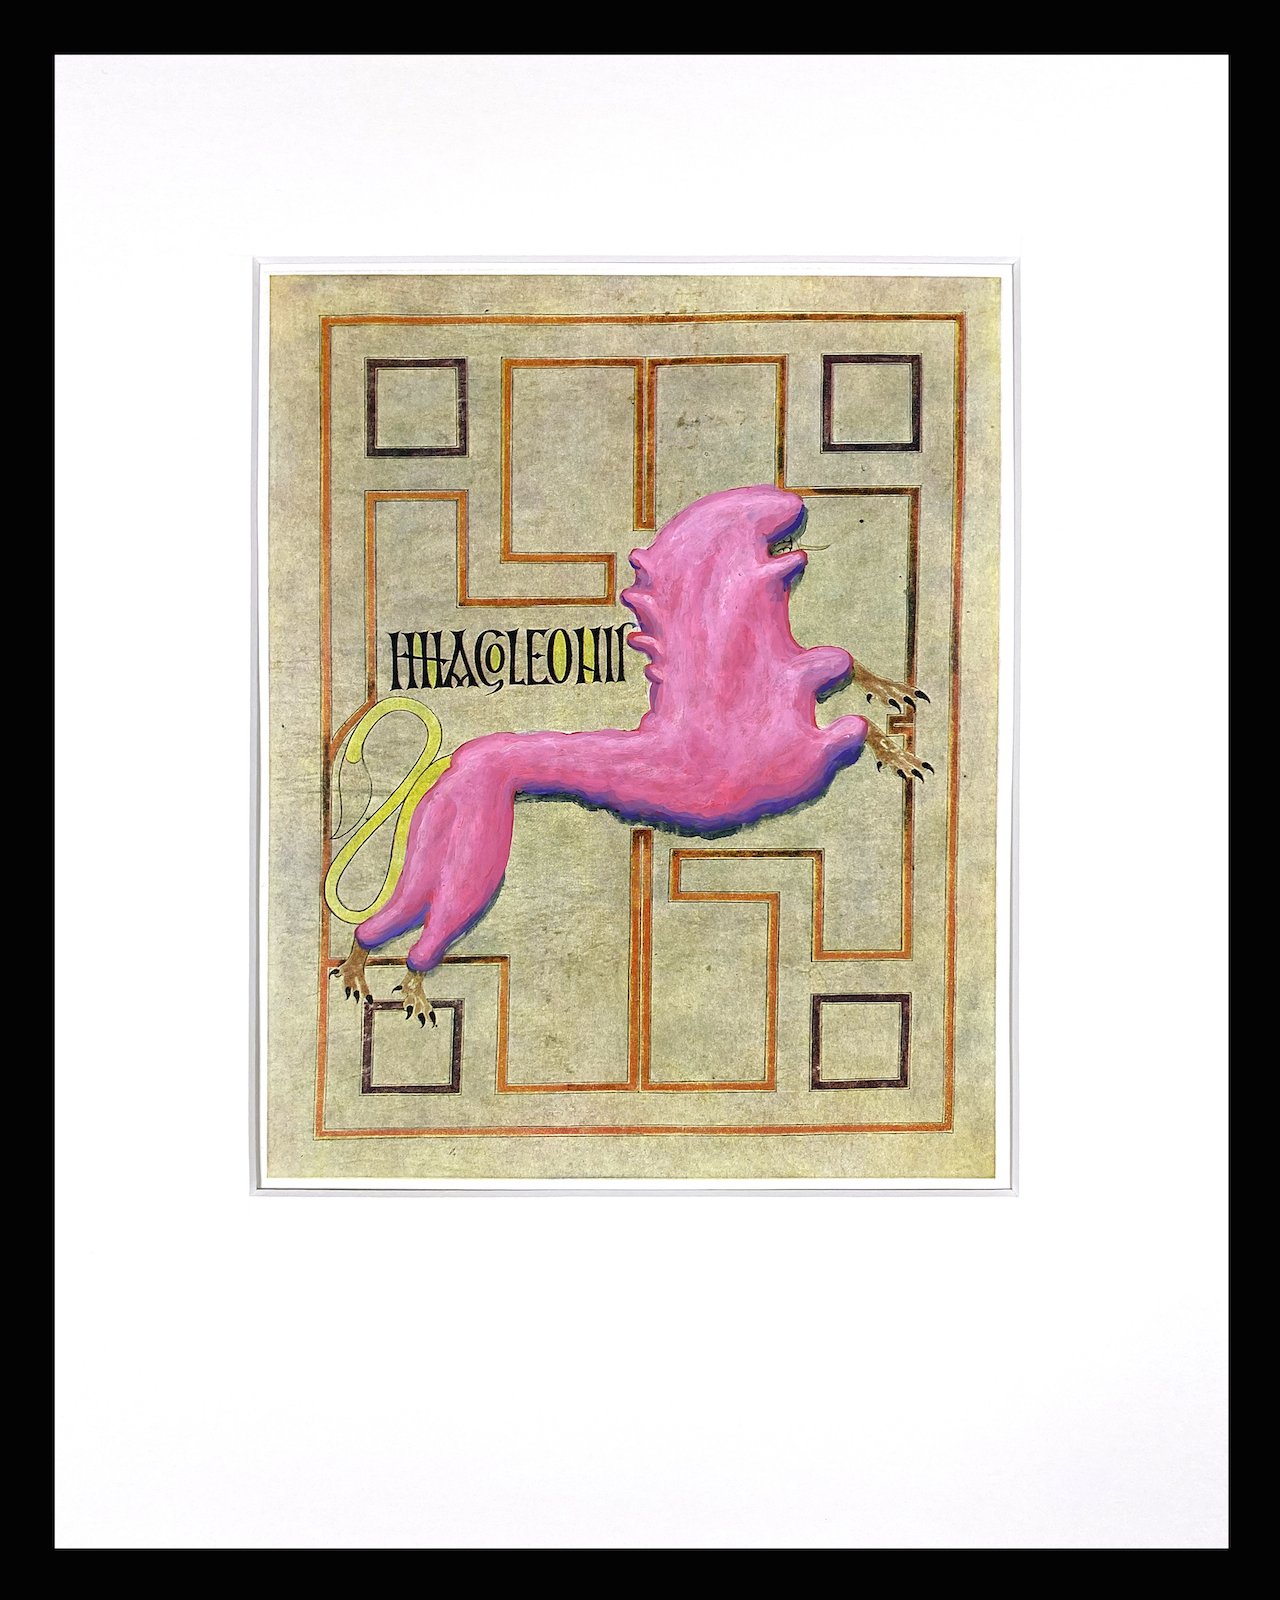    Bubble Gum on Symbol of St. Mark, from the Echternach Gospels (colorplate 18) – Part 2: Chapter 3. Romanesque Art,   acrylic, watercolor, ink on textbook paper. framed: 15” x 12” 